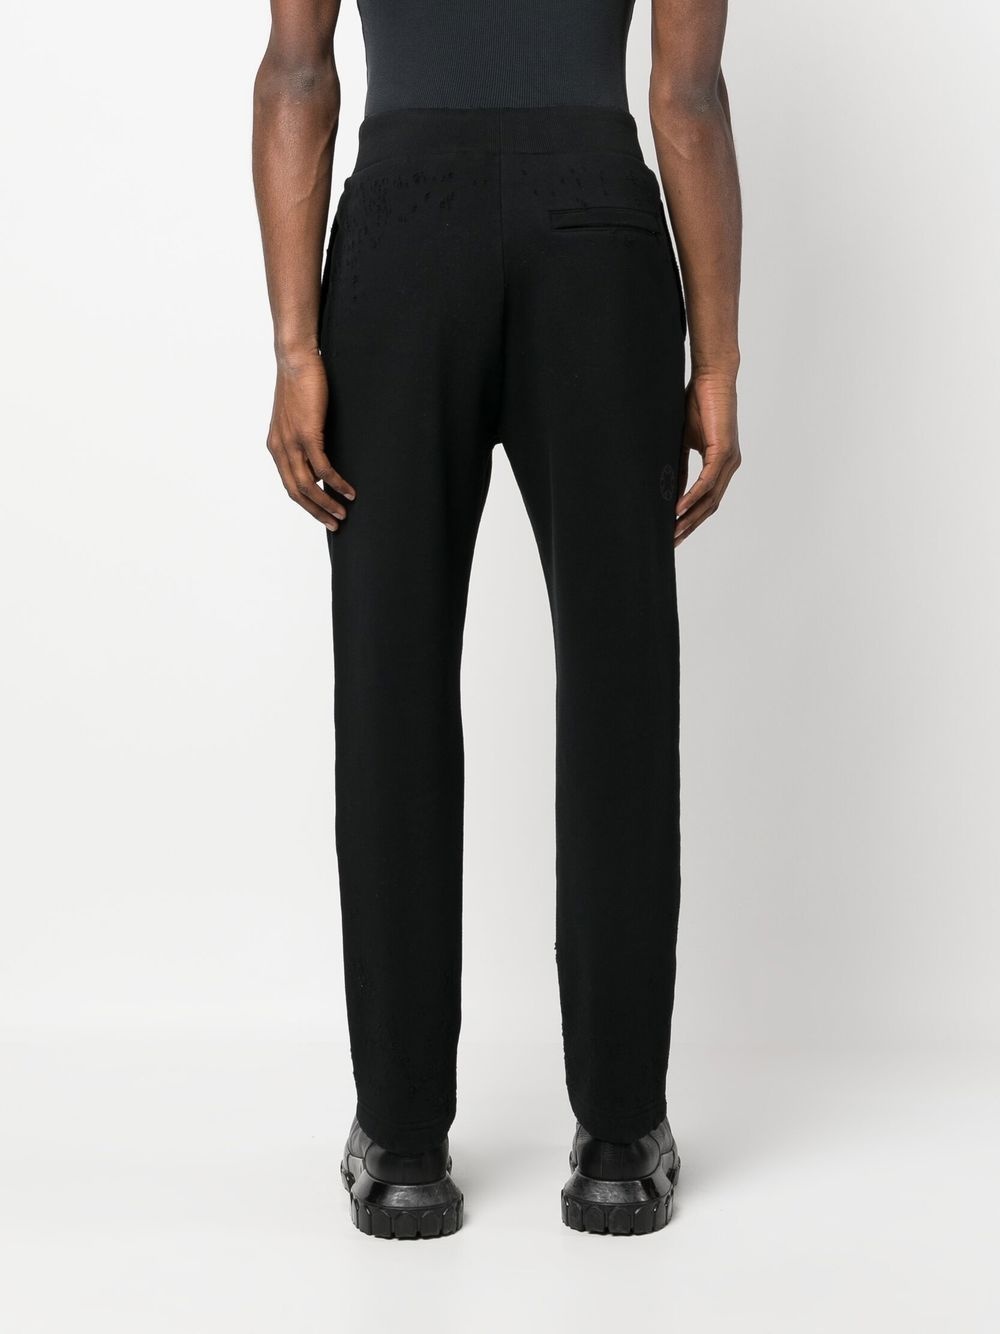 ripped-detail track pants - 5